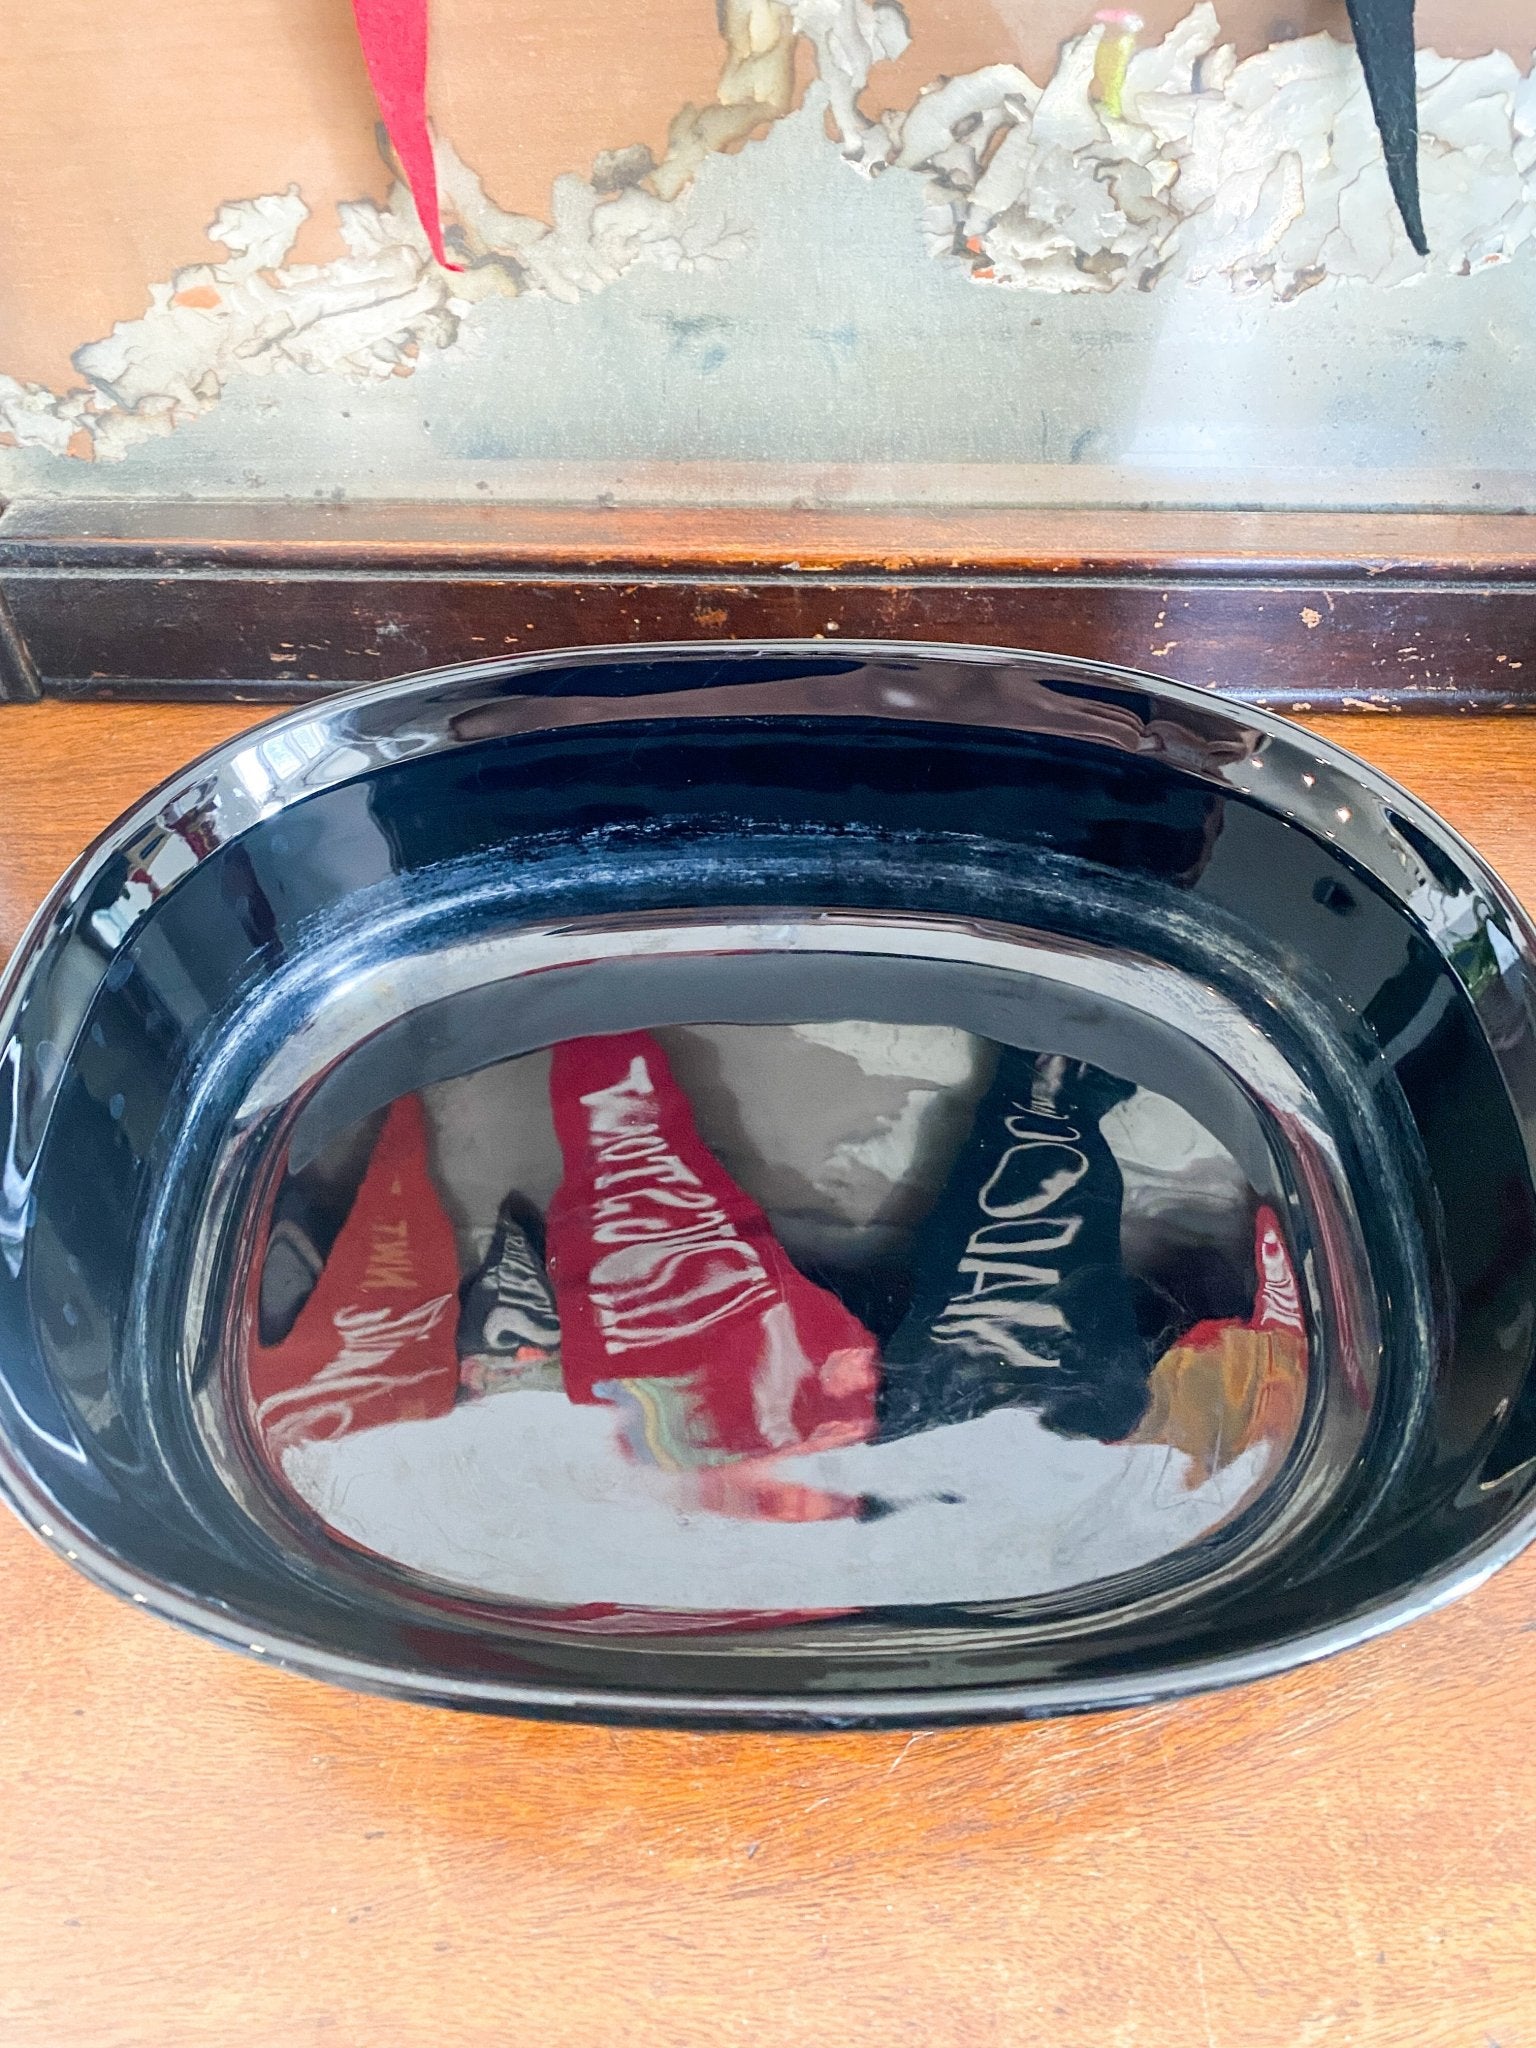 The black casserole dish is without its lid and shows the inside of the dish. There is a reflection of pennant flags. 